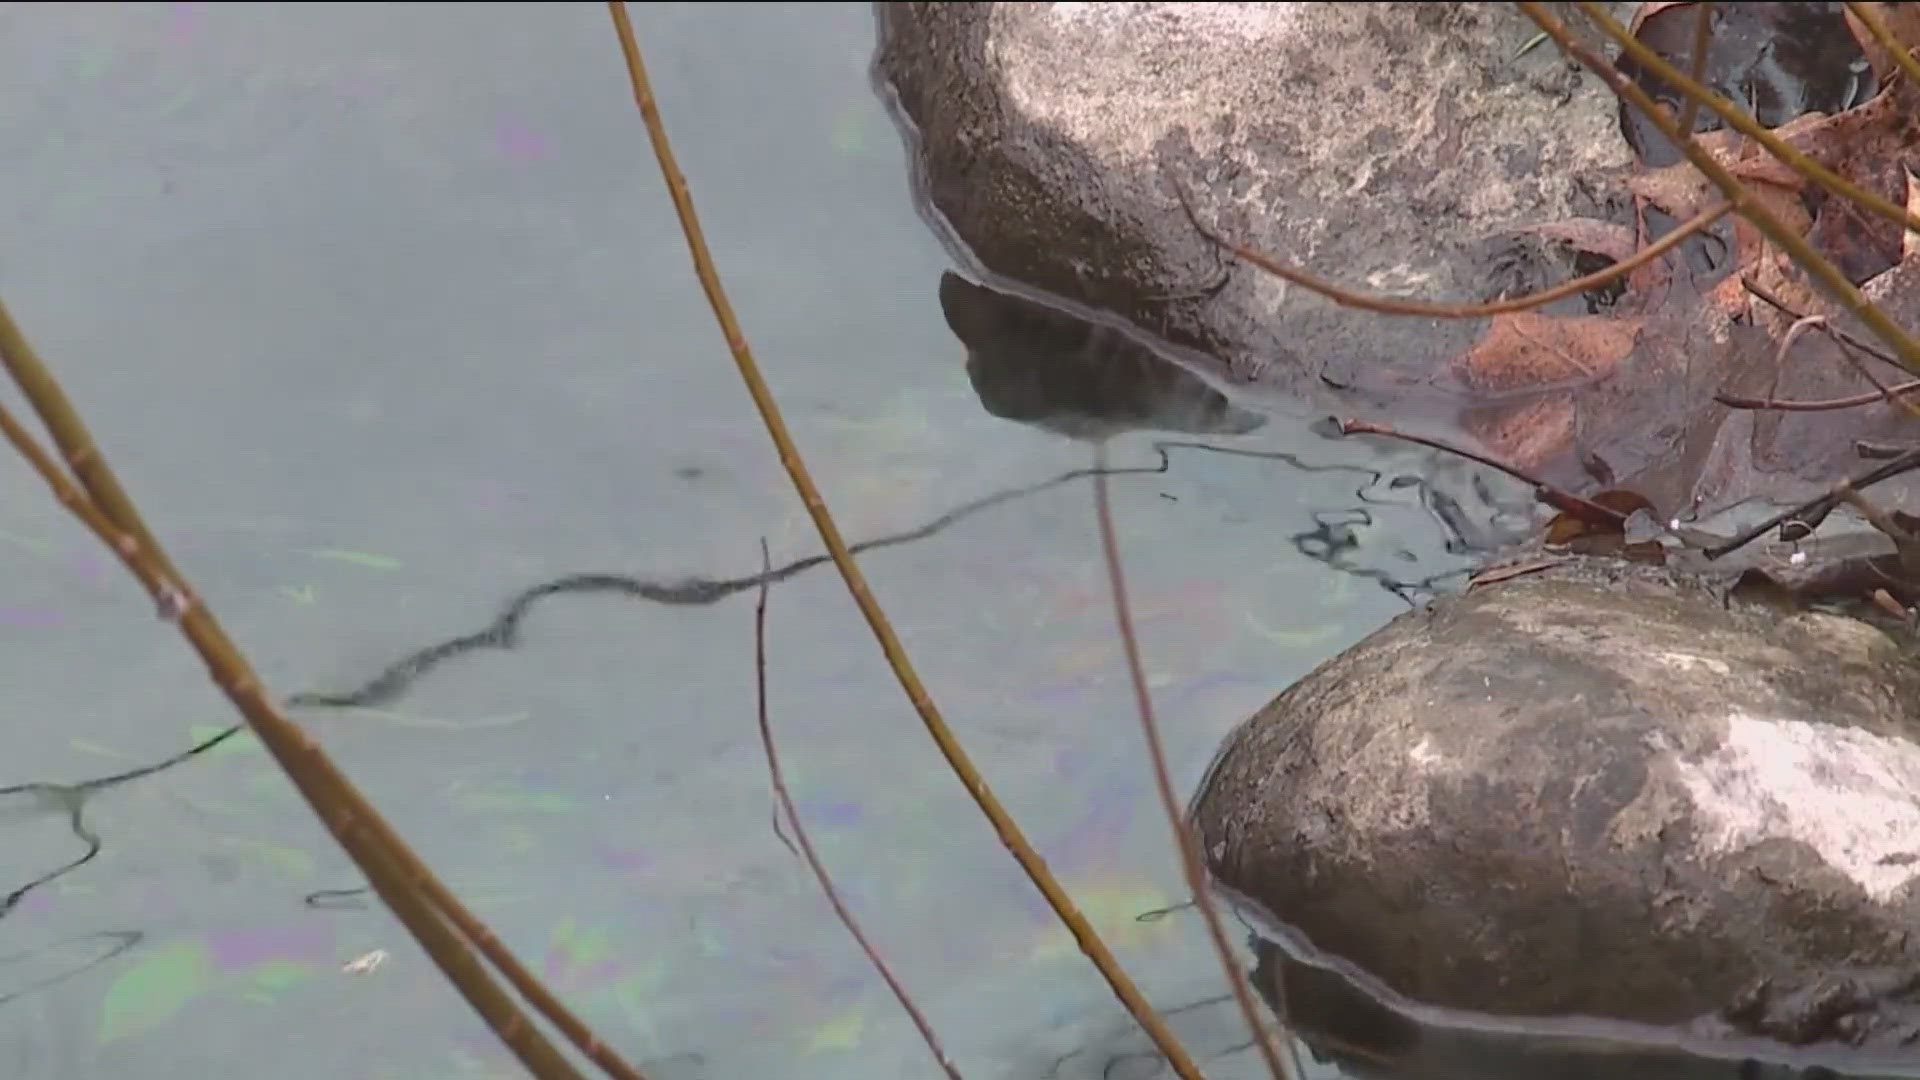 According to the Department of Justice, a fisherman in Hardin County first reported seeing fish killed by exposure to the hazardous wastewater.